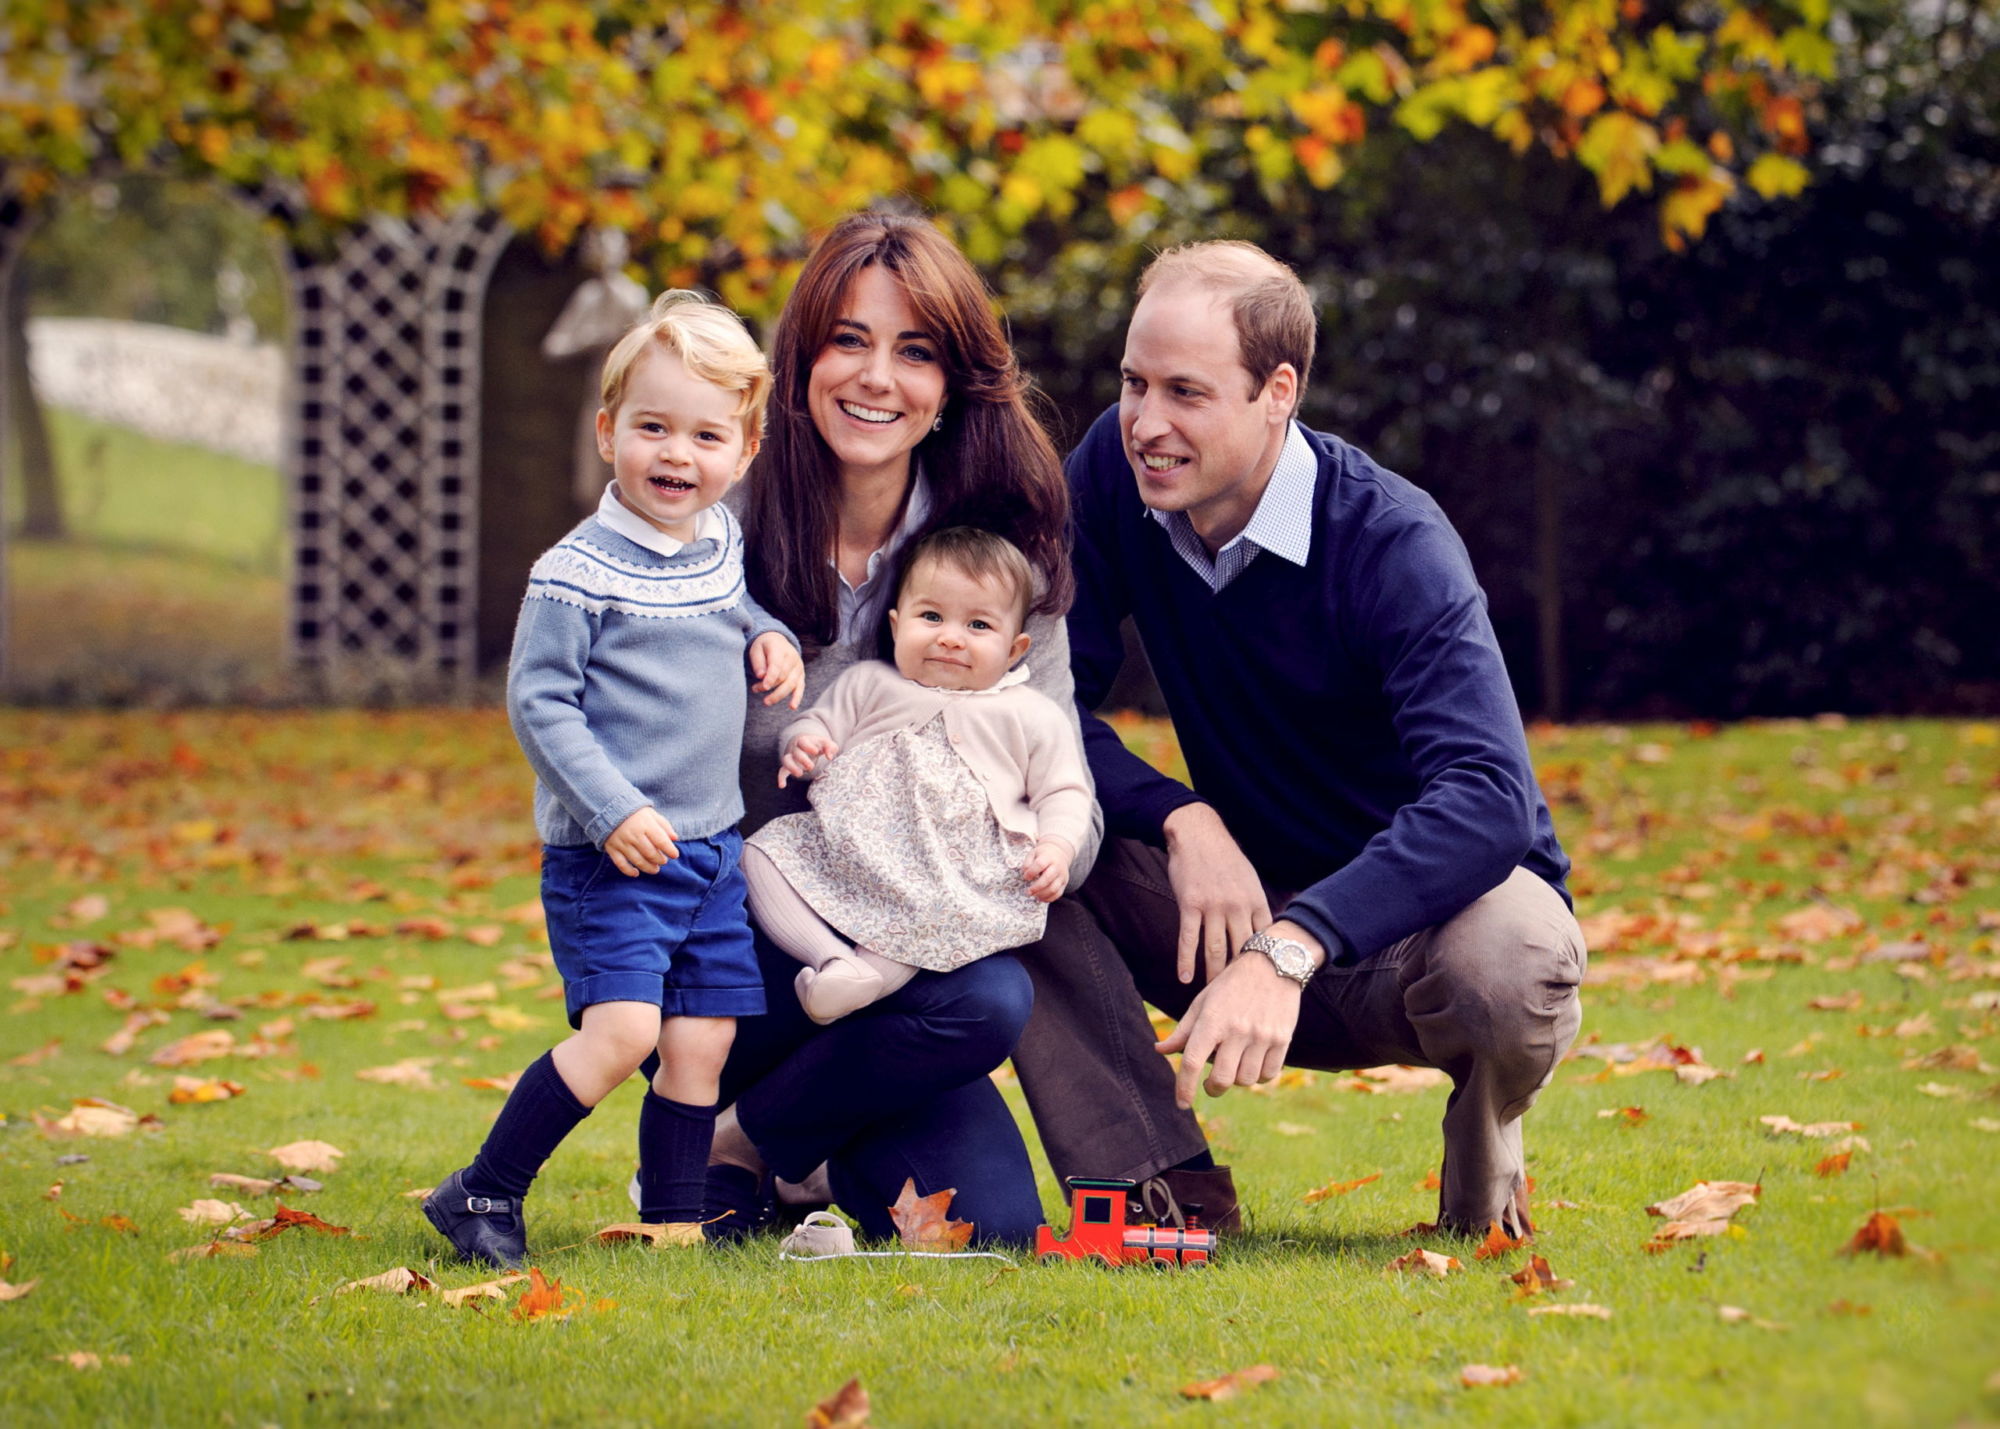 Britain's Prince William, his wife Kate, and their children George (L) and Charlotte pose in a photo  taken in late October 2015, and handed out by Kensington Palace December 18, 2015. REUTERS/Chris Jelf/Handout TPX IMAGES OF THE DAY     ATTENTION EDITORS - THIS IMAGE HAS BEEN SUPPLIED BY A THIRD PARTY. IT IS DISTRIBUTED, EXACTLY AS RECEIVED BY REUTERS, AS A SERVICE TO CLIENTS. FOR EDITORIAL USE ONLY. NOT FOR SALE FOR MARKETING OR ADVERTISING CAMPAIGNS.  NO RESALES. NO ARCHIVE. NEWS EDITORIAL USE ONLY. NO COMMERCIAL USE (including any use in merchandising, advertising or any other non-editorial use including, for example, calendars, books and supplements). This photograph is provided to you strictly on condition that you will make no charge for the supply, release or publication of it and that these conditions and restrictions will apply (and that you will pass these on) to any organisation to whom you supply it. All other requests for use should be directed to the Press Office at Kensington Palace in writing.                - RTX1Z83X